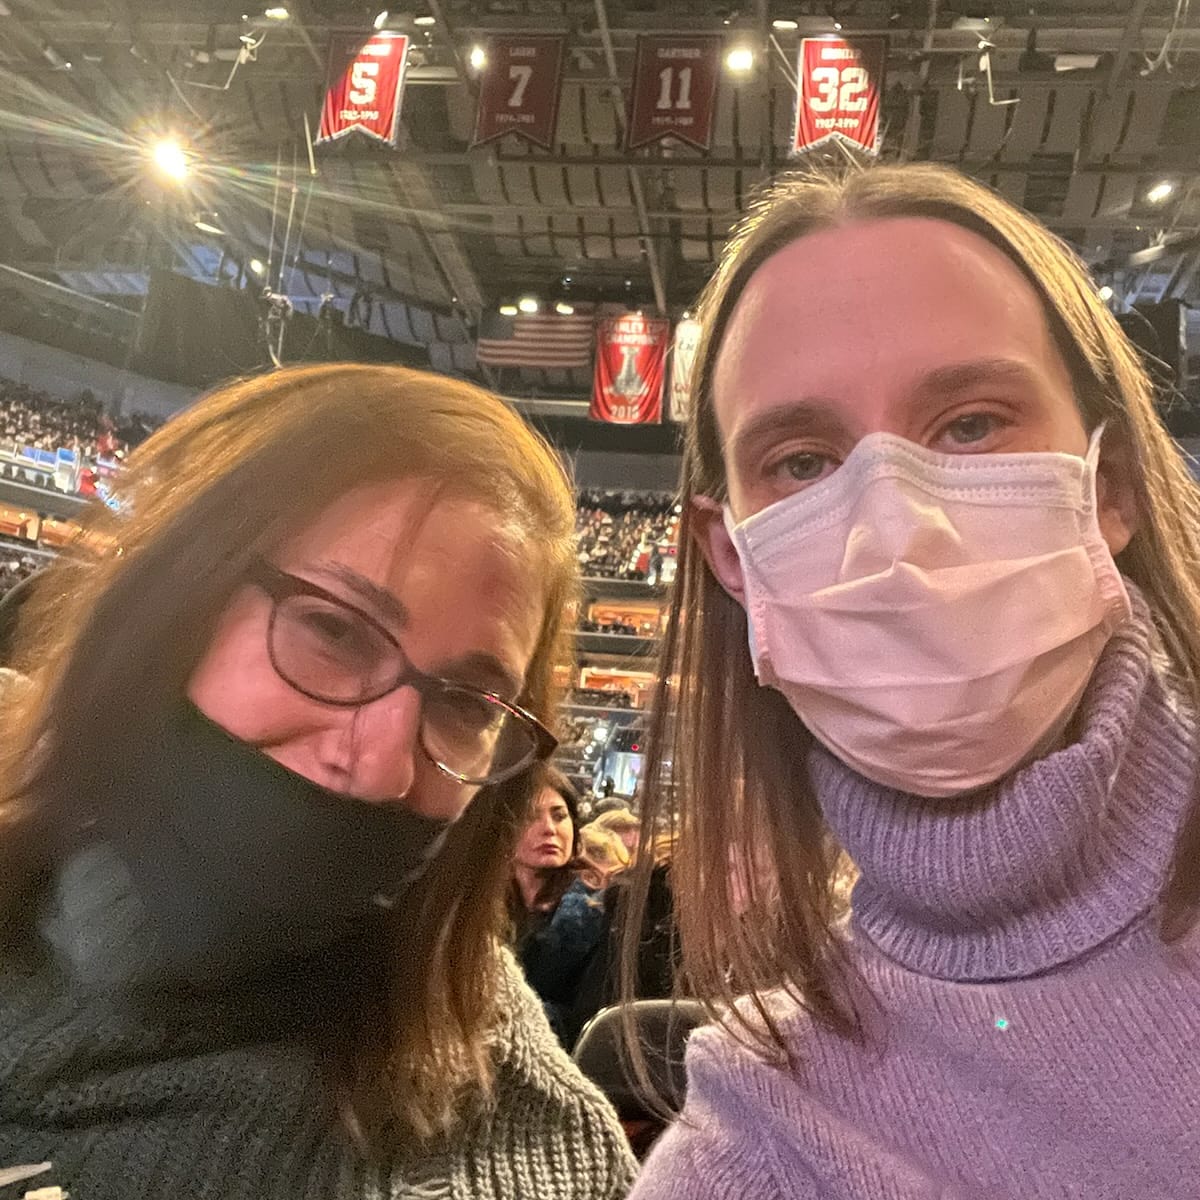 At Capital One Arena to see Andrea Bocelli with good friend Heather (yes, I fixed my mask after the pic!), 12-21.